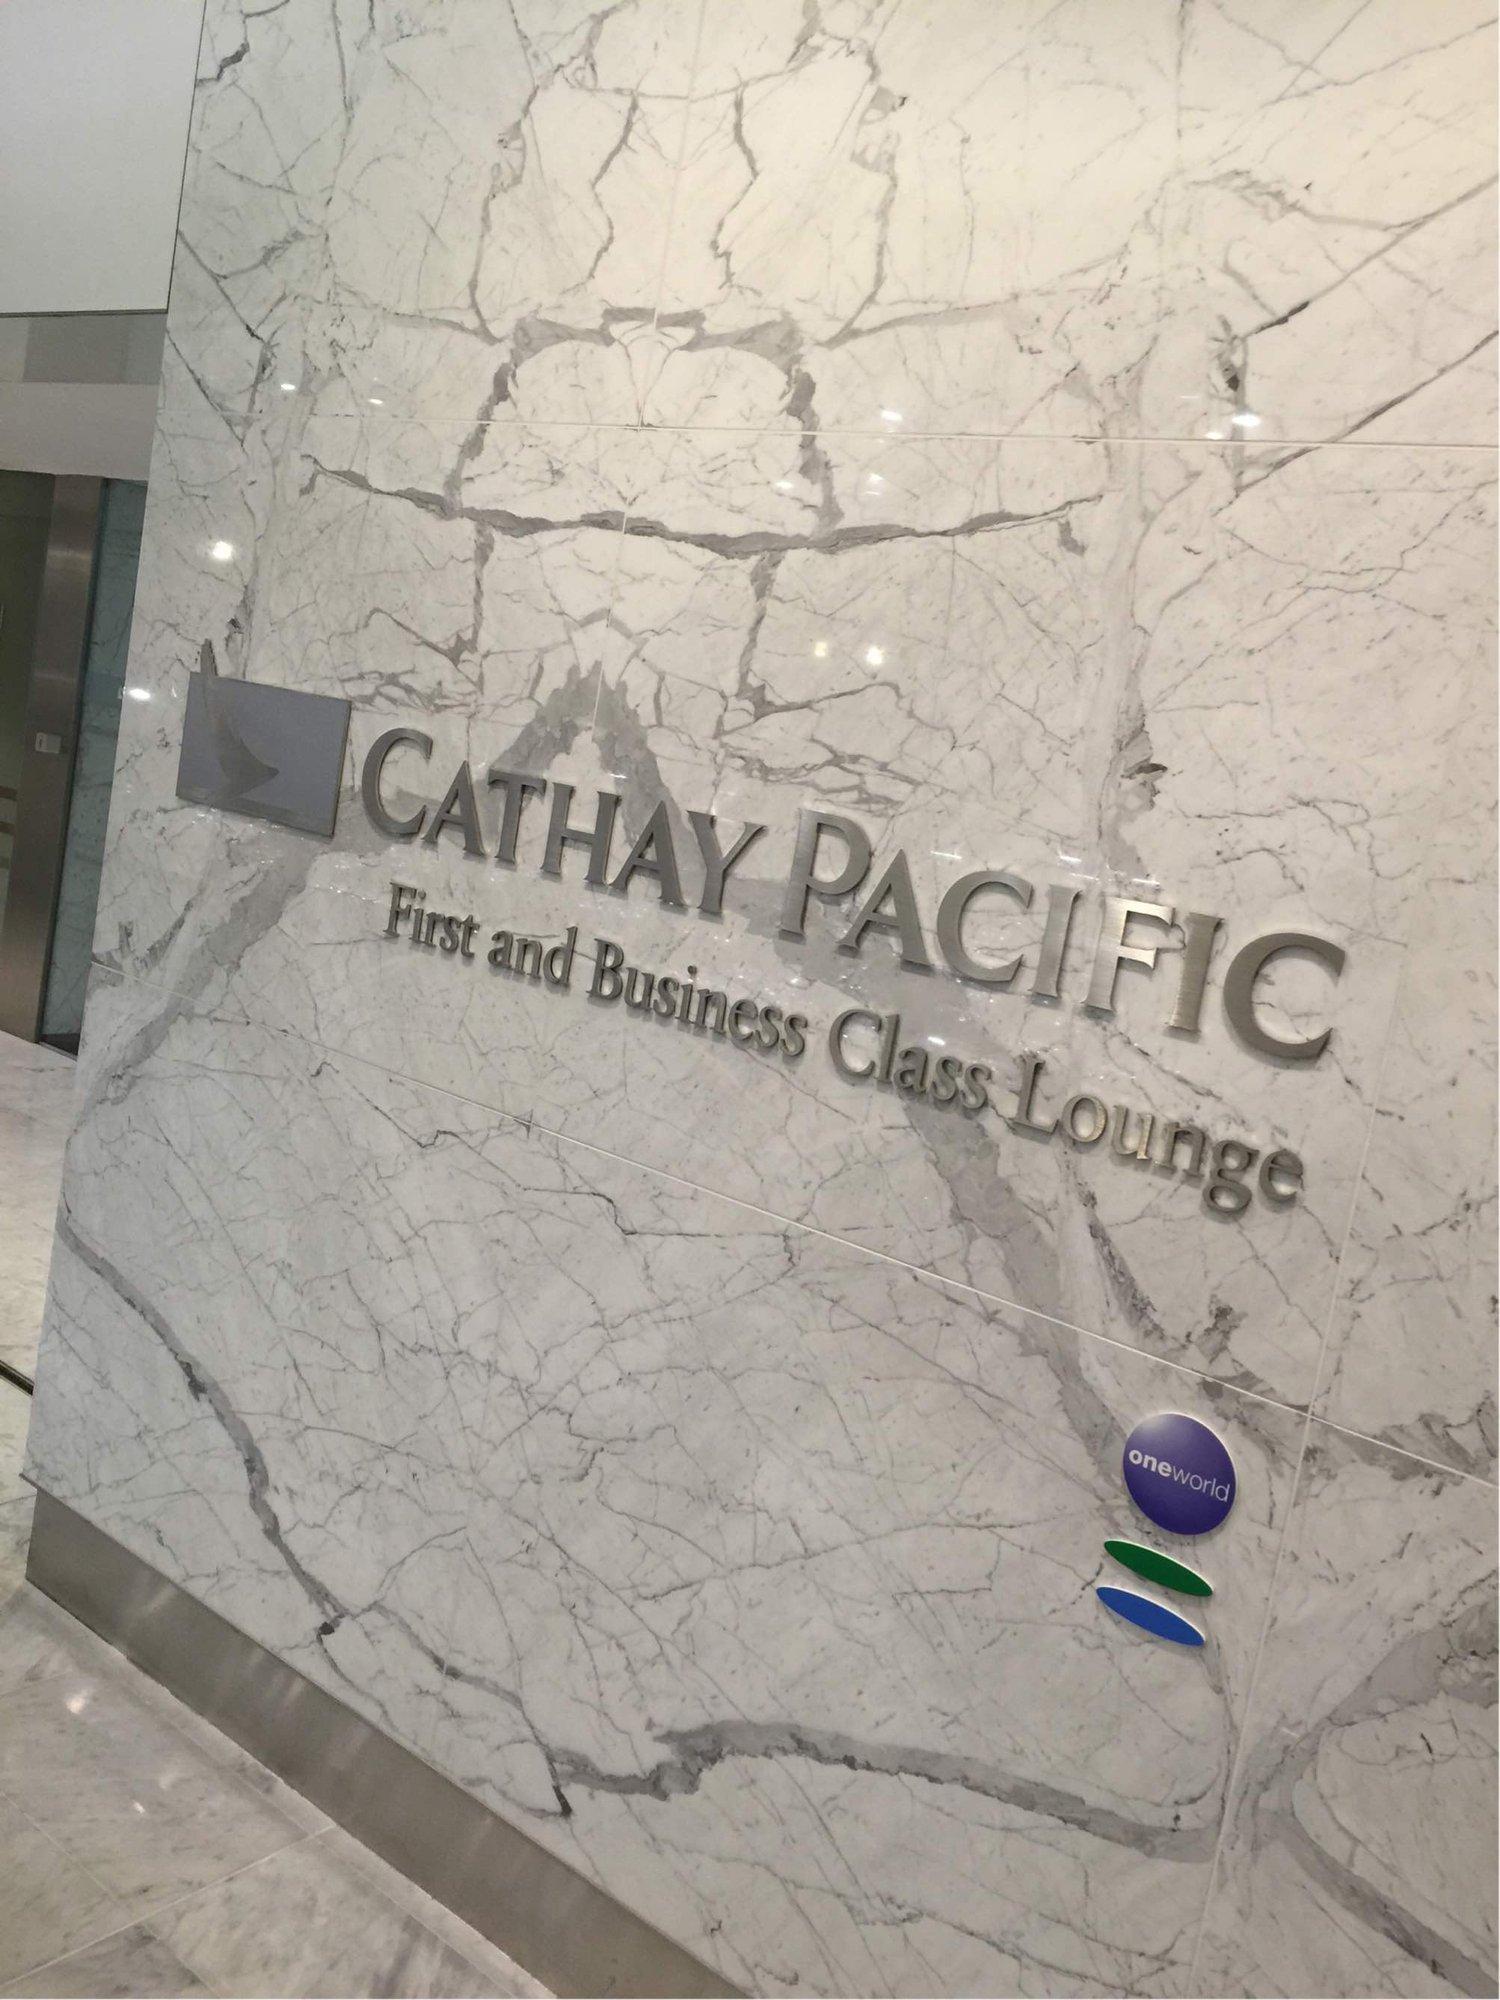 Cathay Pacific First and Business Class Lounge  image 21 of 29